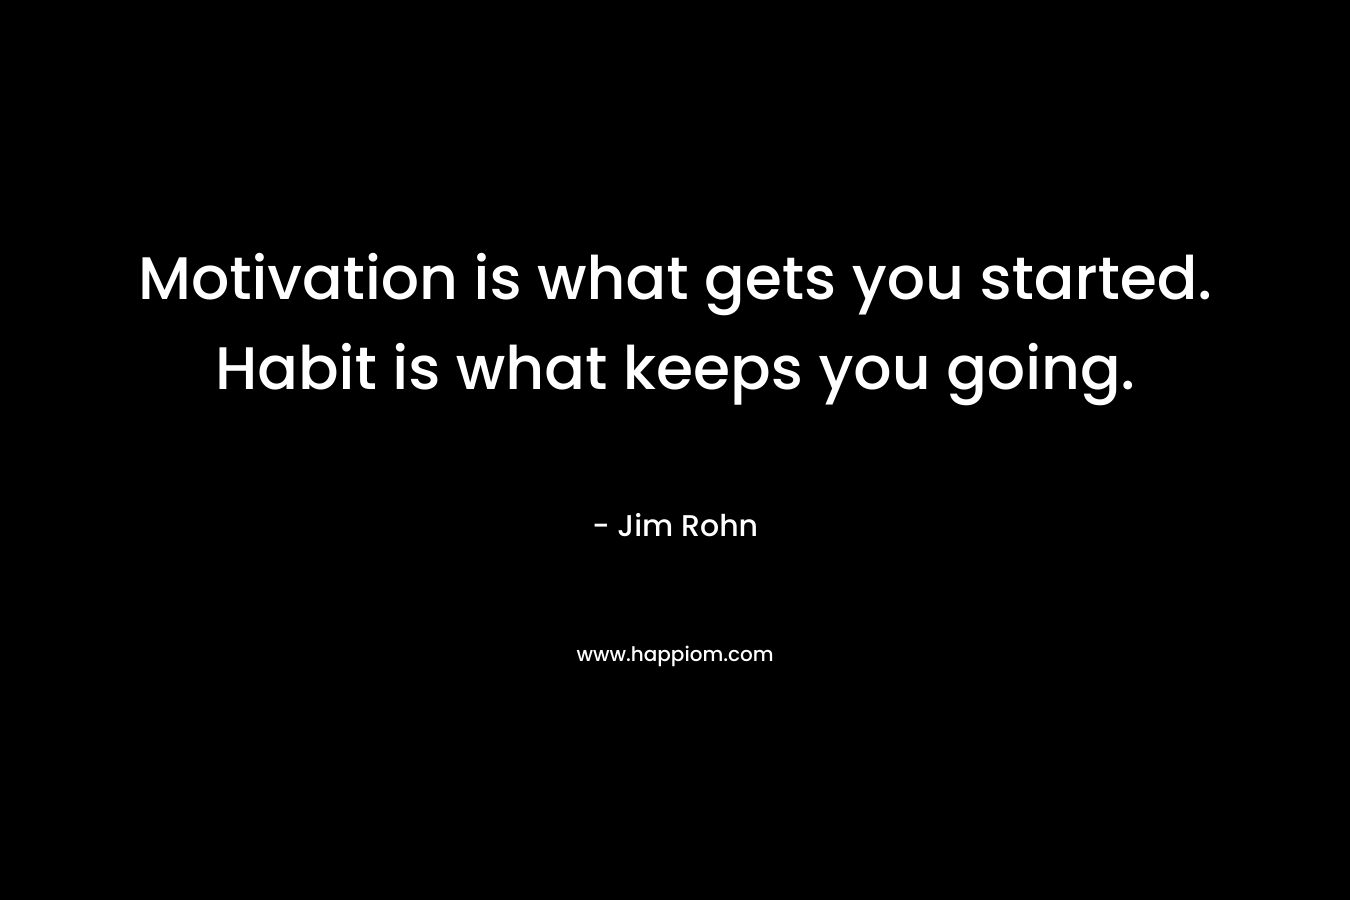 Motivation is what gets you started. Habit is what keeps you going. – Jim Rohn